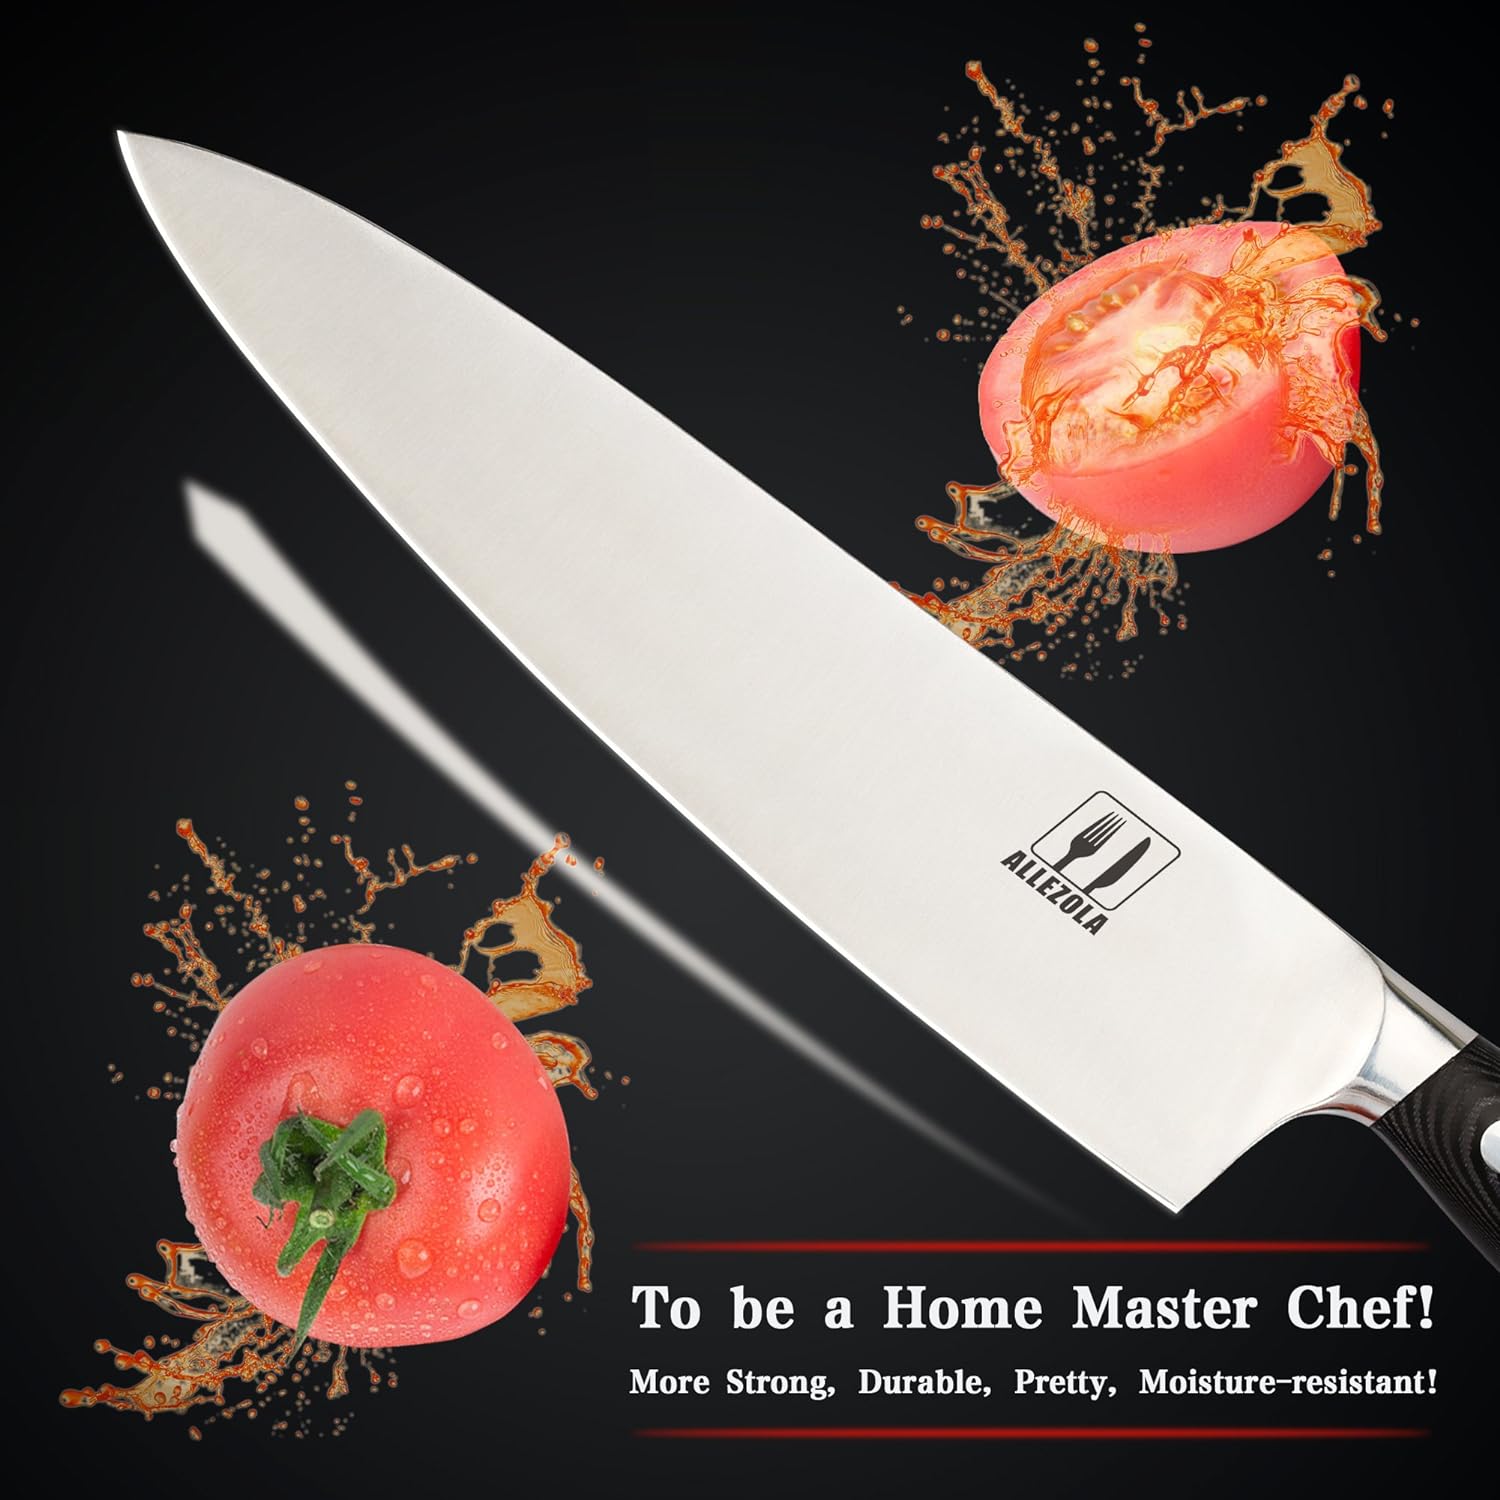 Allezola Professional Chef's Knife, 7.5 Inch German High Carbon Stainless Steel, Razor Sharp, Non-Rust, Balanced Comfortable Han